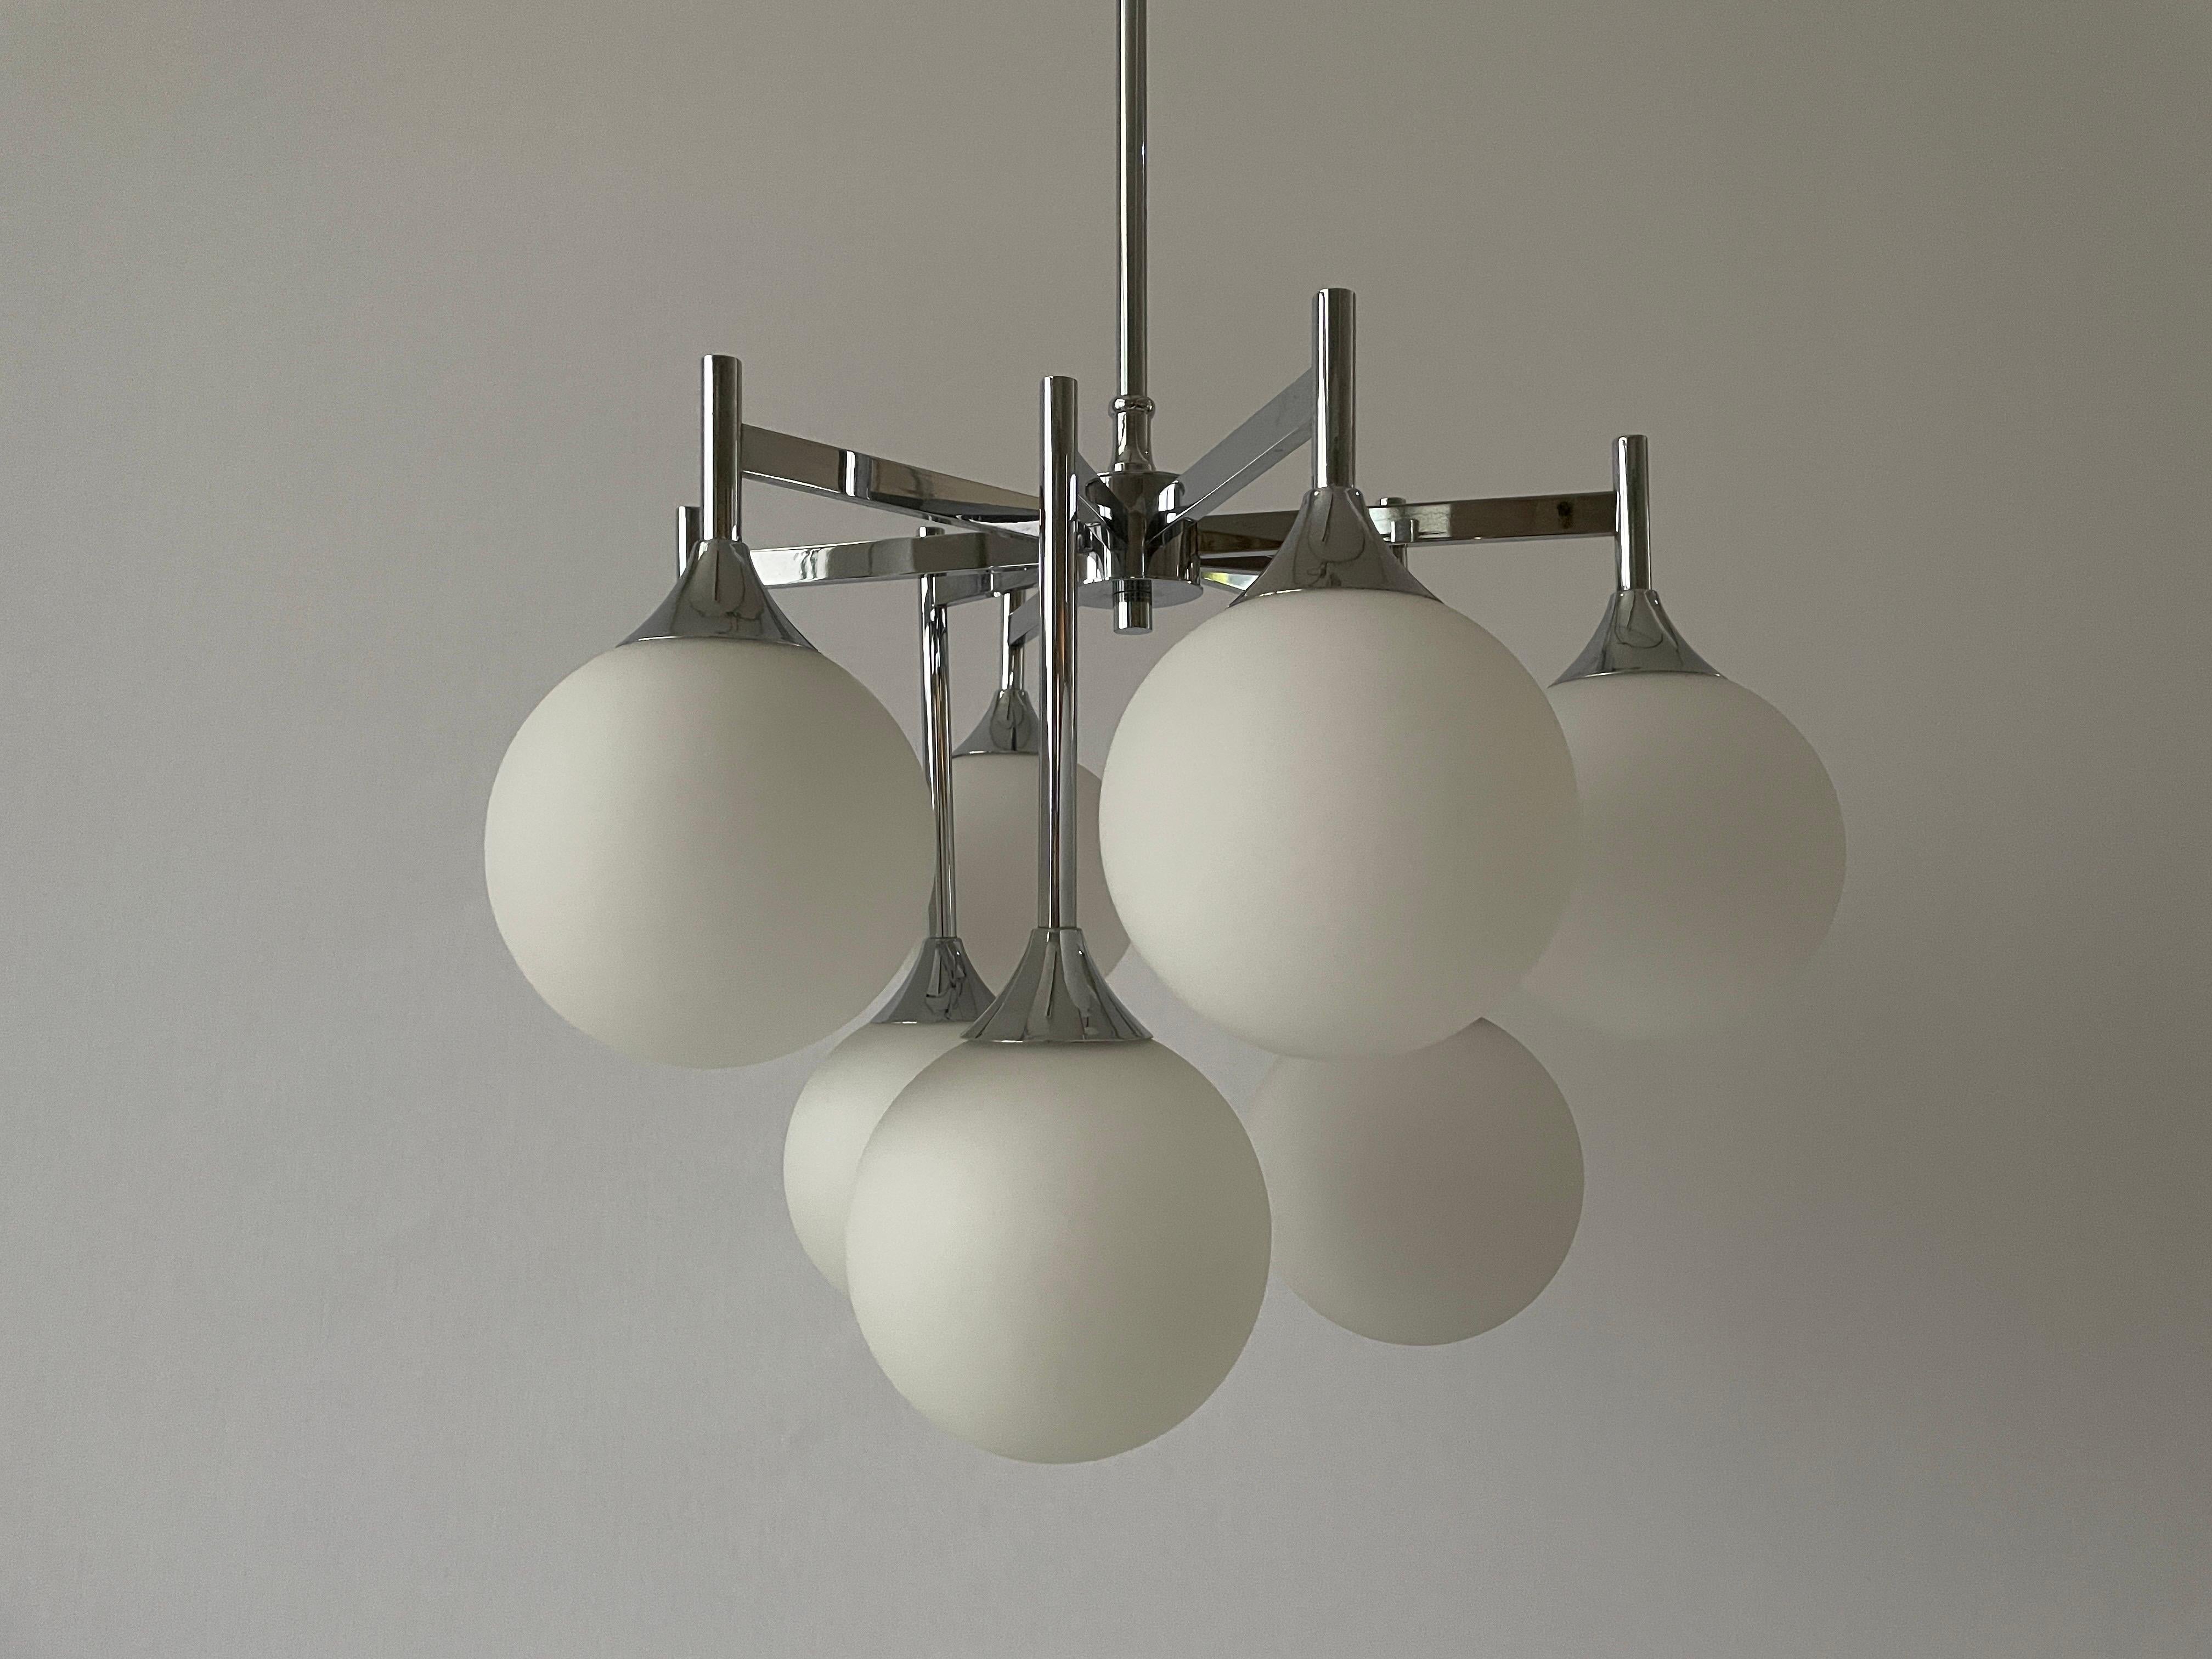 9 White Ball Glass and Chrome Body Chandelier by Kaiser Leuchten, 1960s, Germany

Fantastic pendant lamp

Lampshade is in good condition and very clean. 
This lamp works with 9 x E14 light bulb. 
Wired and suitable to use with 220V and 110V for all